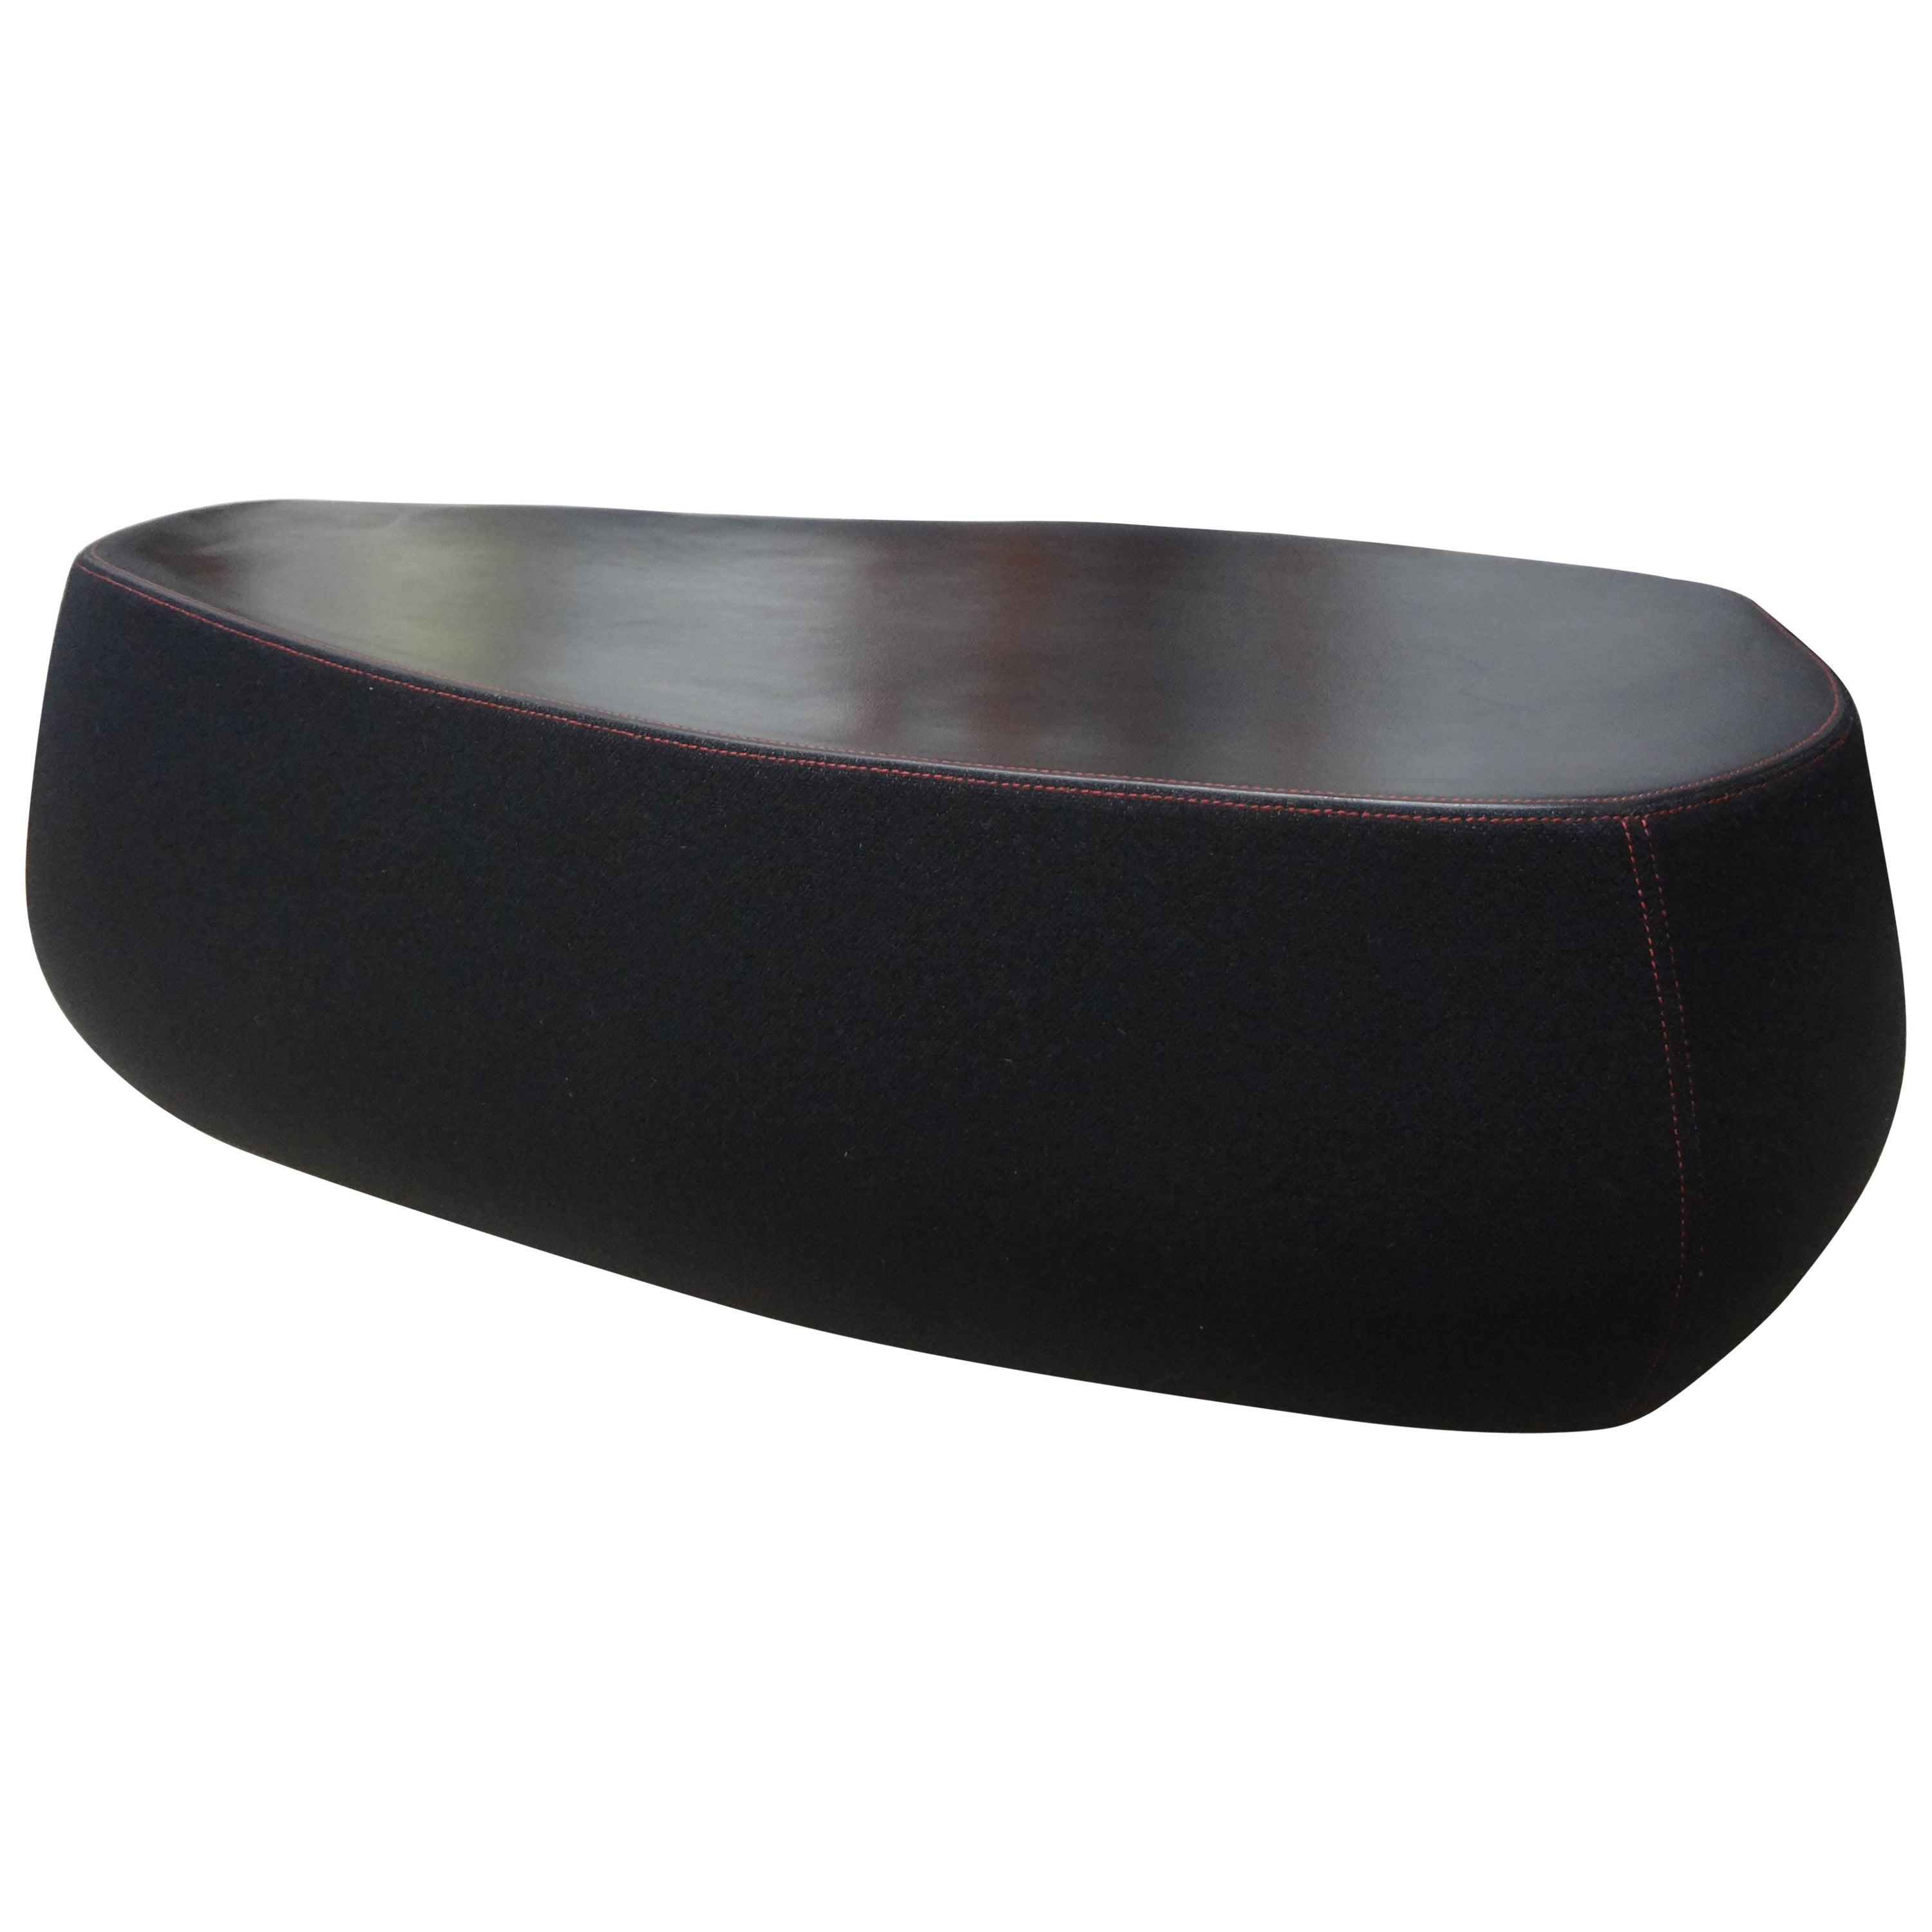 Italian Modern Sculptural Bench or Pouf by Moroso For Sale